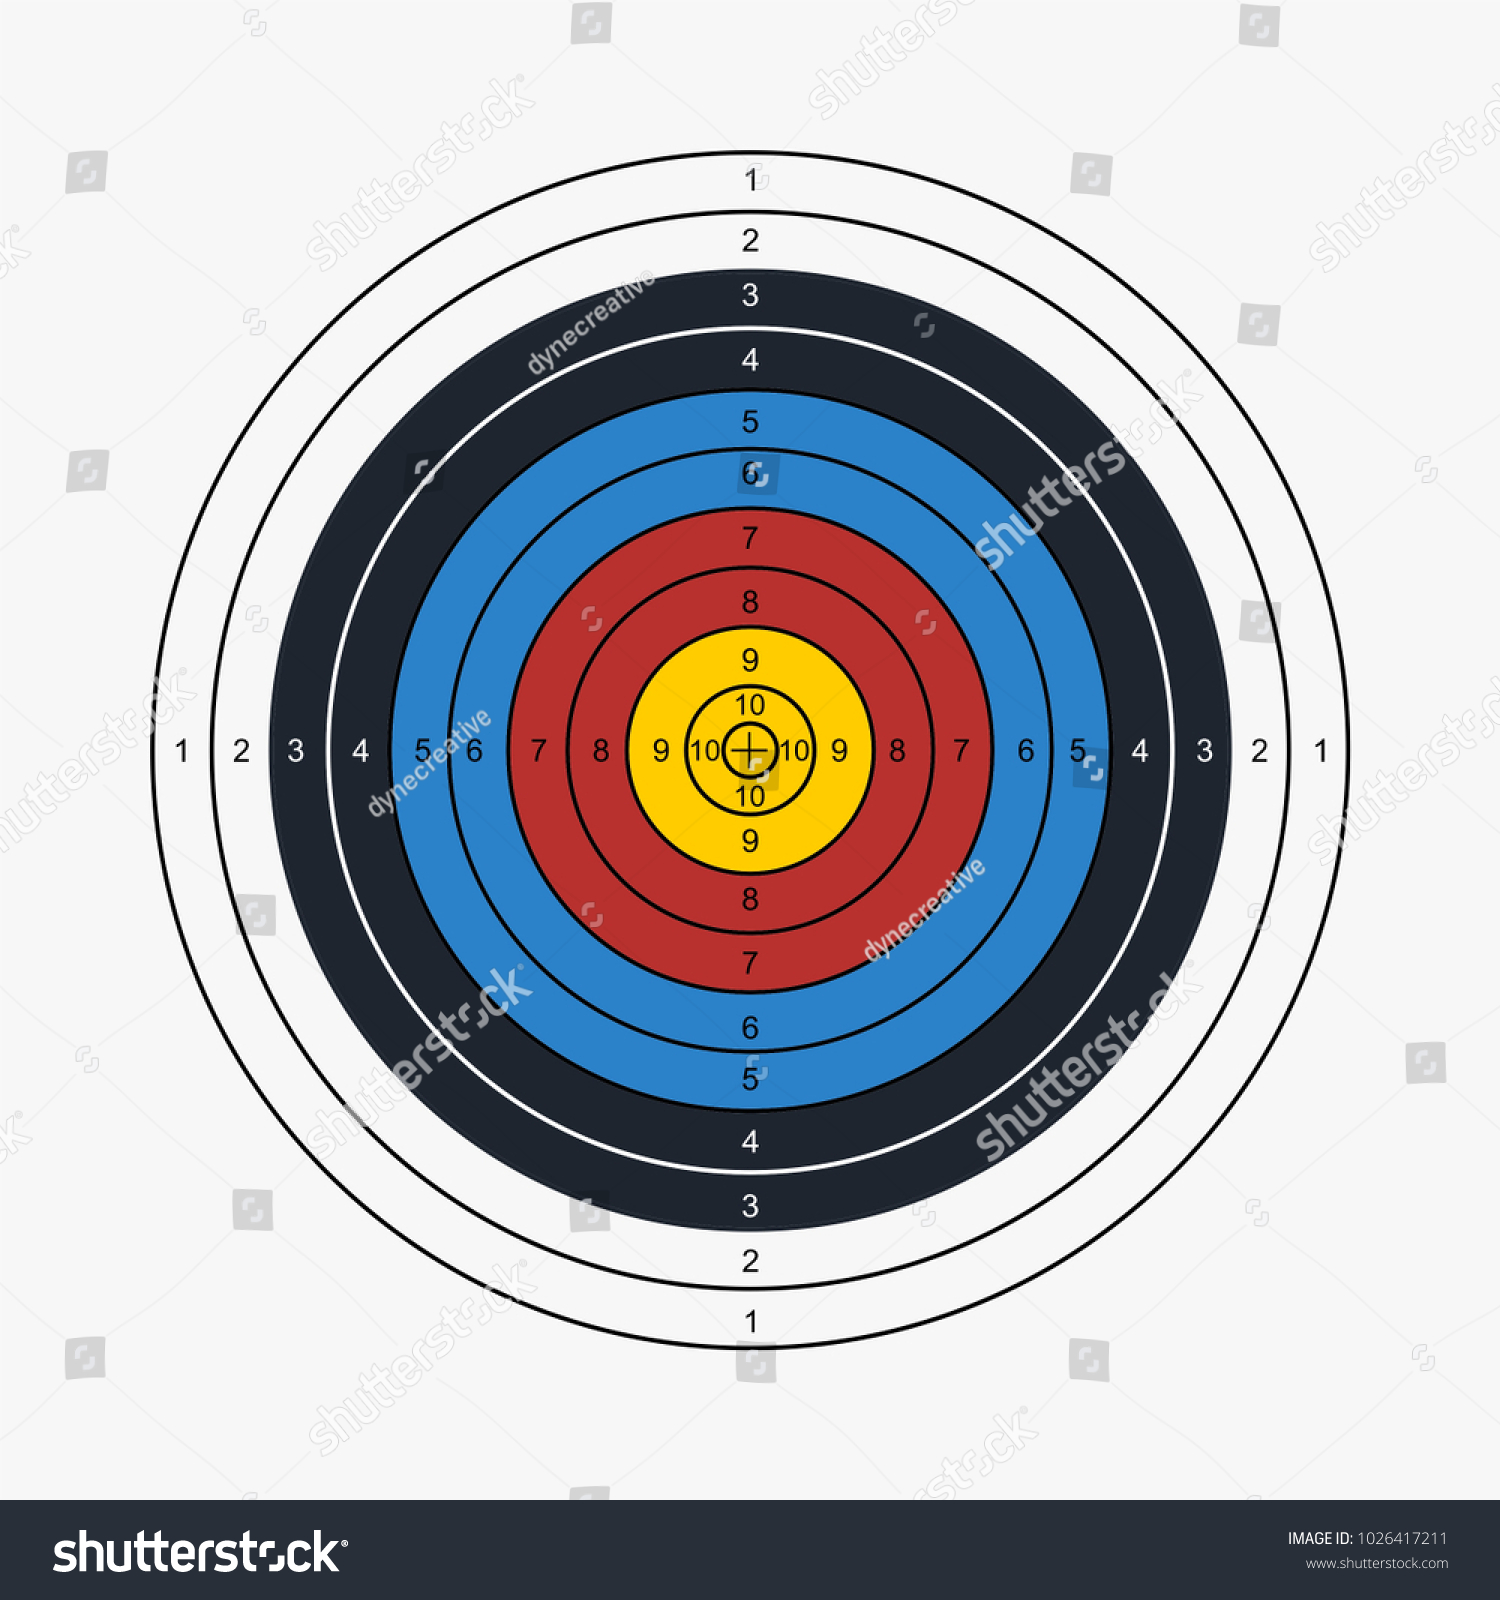 archery target printable vector illustration stock vector royalty free 1026417211